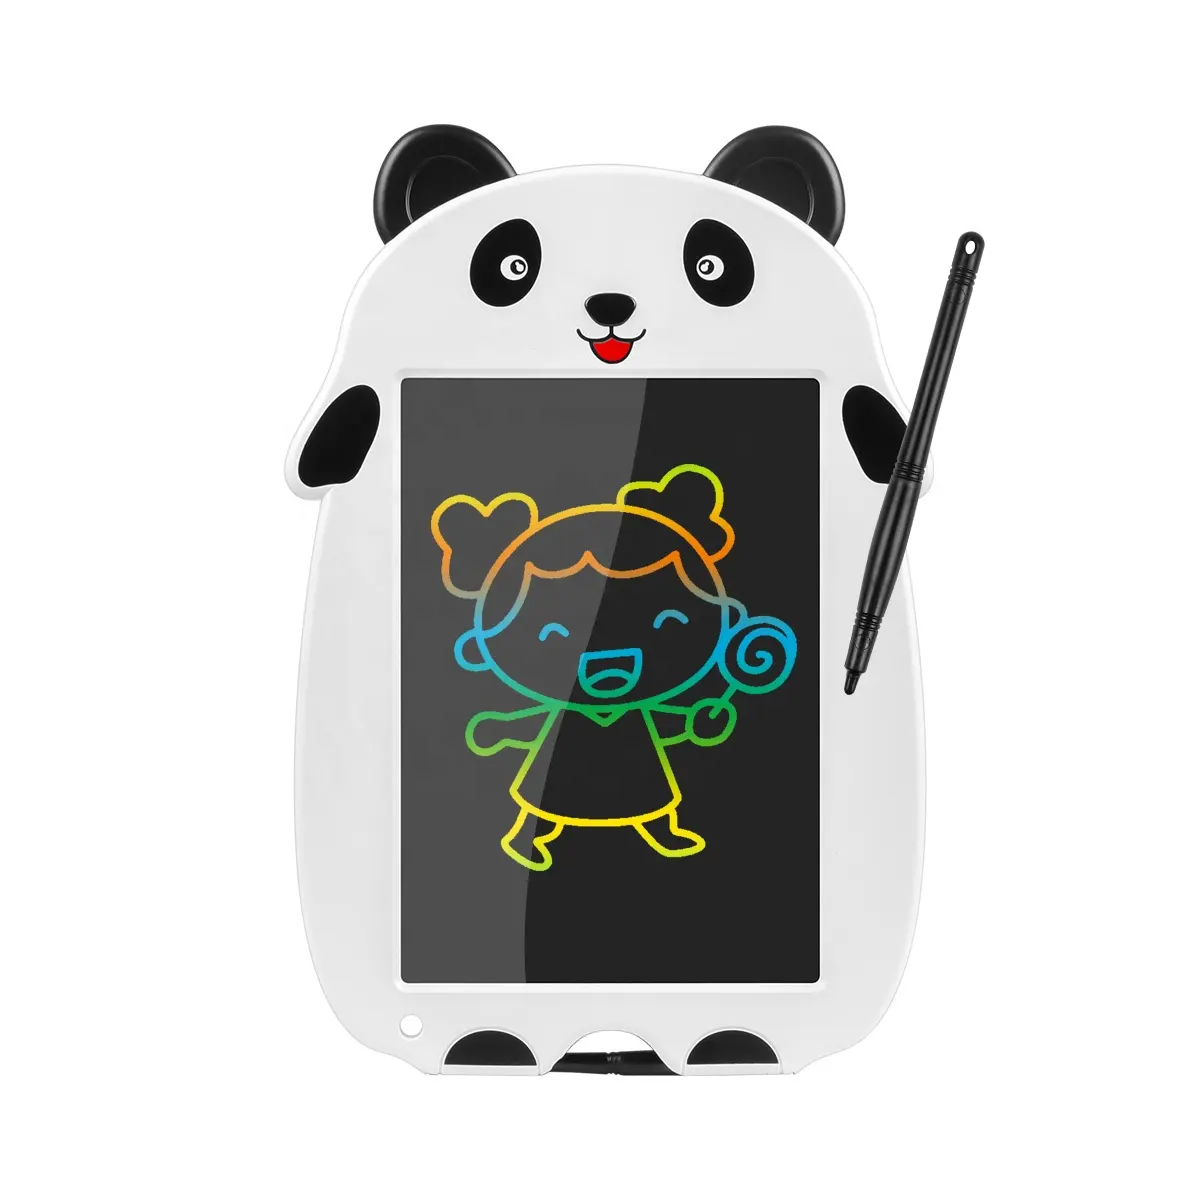 2020 Kids Merry Christmas gifts LCD Writing Tablet Doodle Board, 8.5inch Colorful Drawing Tablet Writing erasable Pad